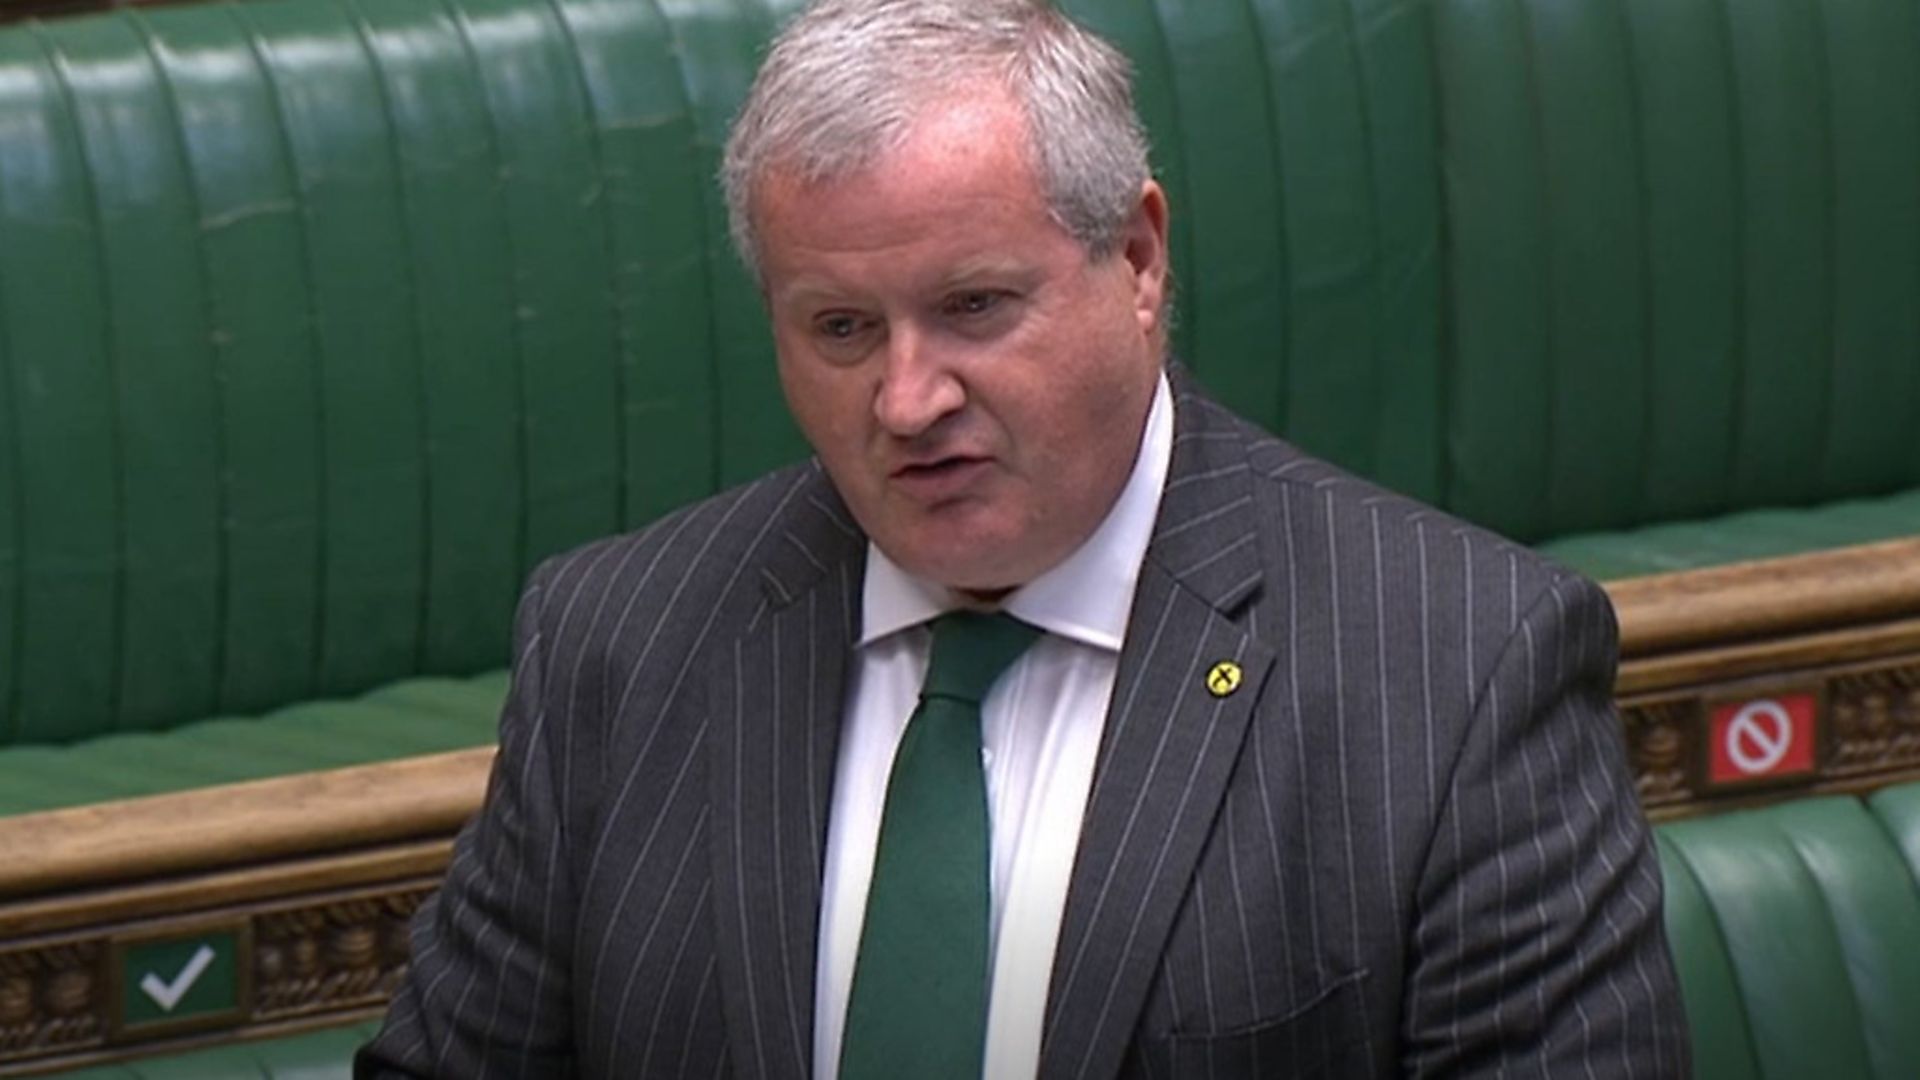 SNP Westminster leader Ian Blackford speaks during Prime Minister's Questions in the House of Commons. Photograph: House of Commons. - Credit: PA